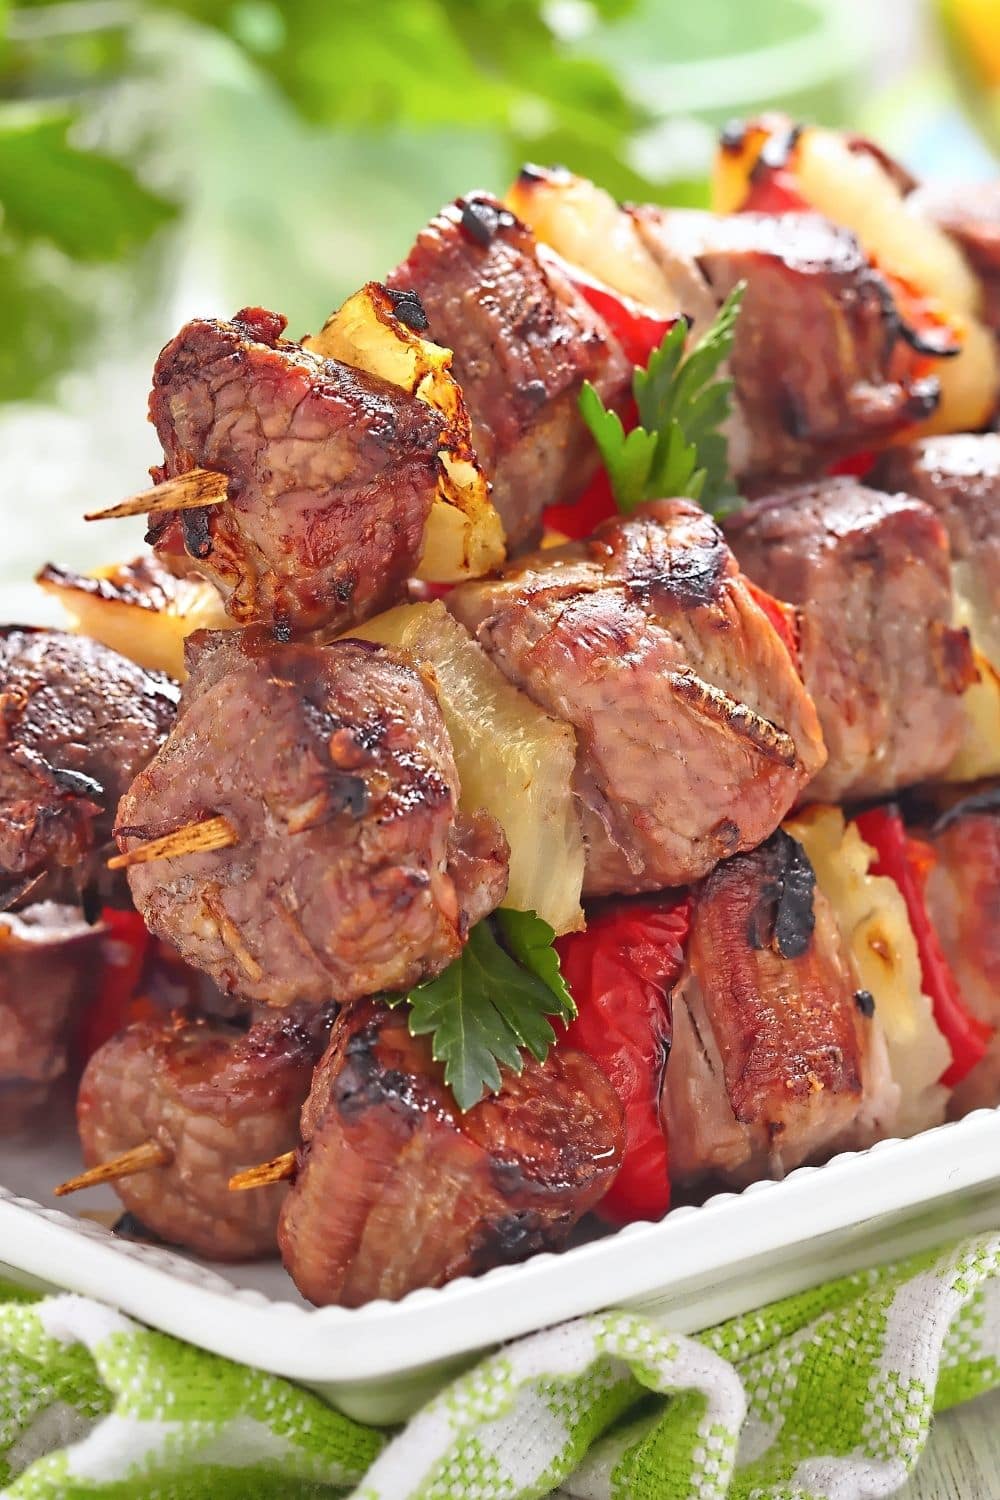 25 Kabob Recipes on Skewers - Insanely Good